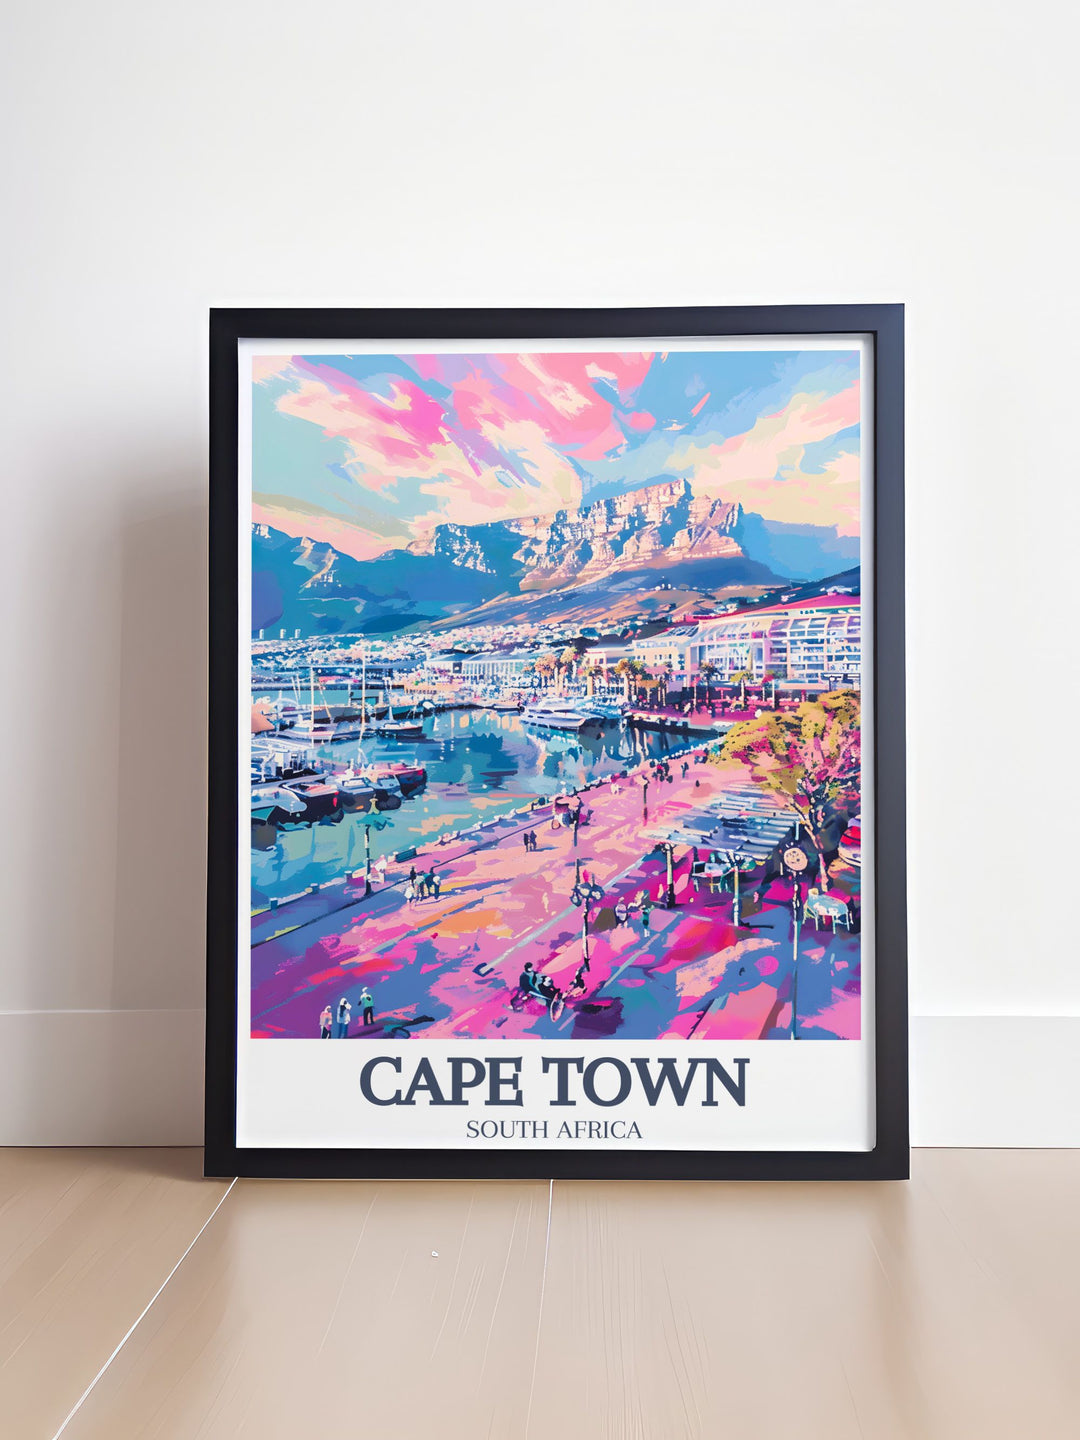 Cape Town art showcasing the majestic Table Mountain and the rugged Cape of Good Hope. This Cape Town poster is a must have for anyone who appreciates South Africas breathtaking scenery. Perfect for adding a touch of Cape Town to your home or office decor.